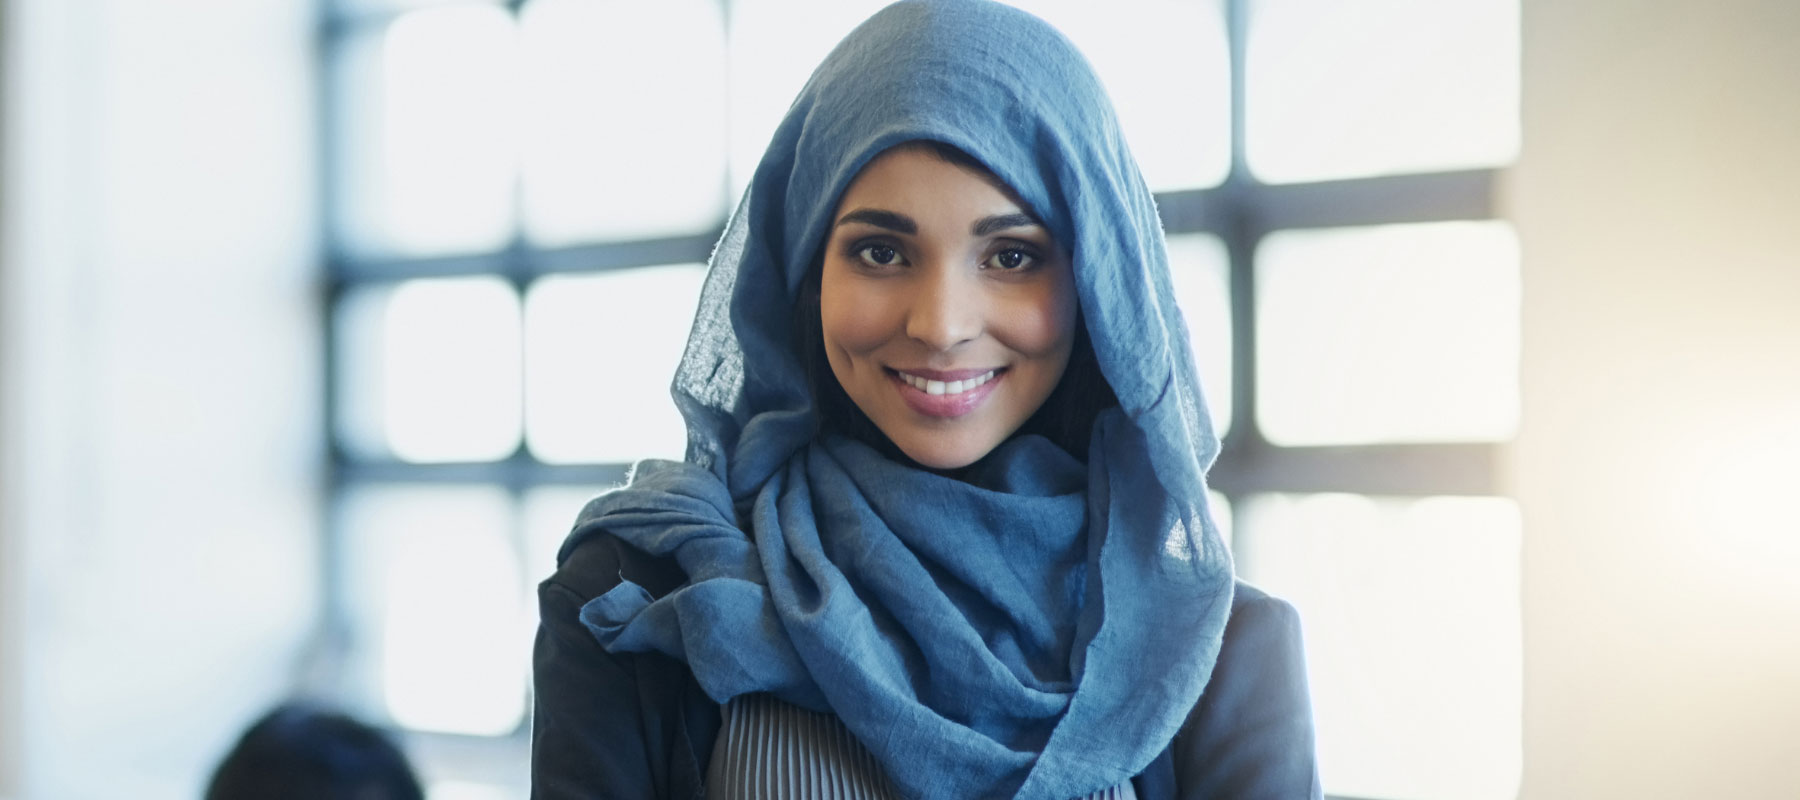 Woman in a head scarf smiles at the camera.